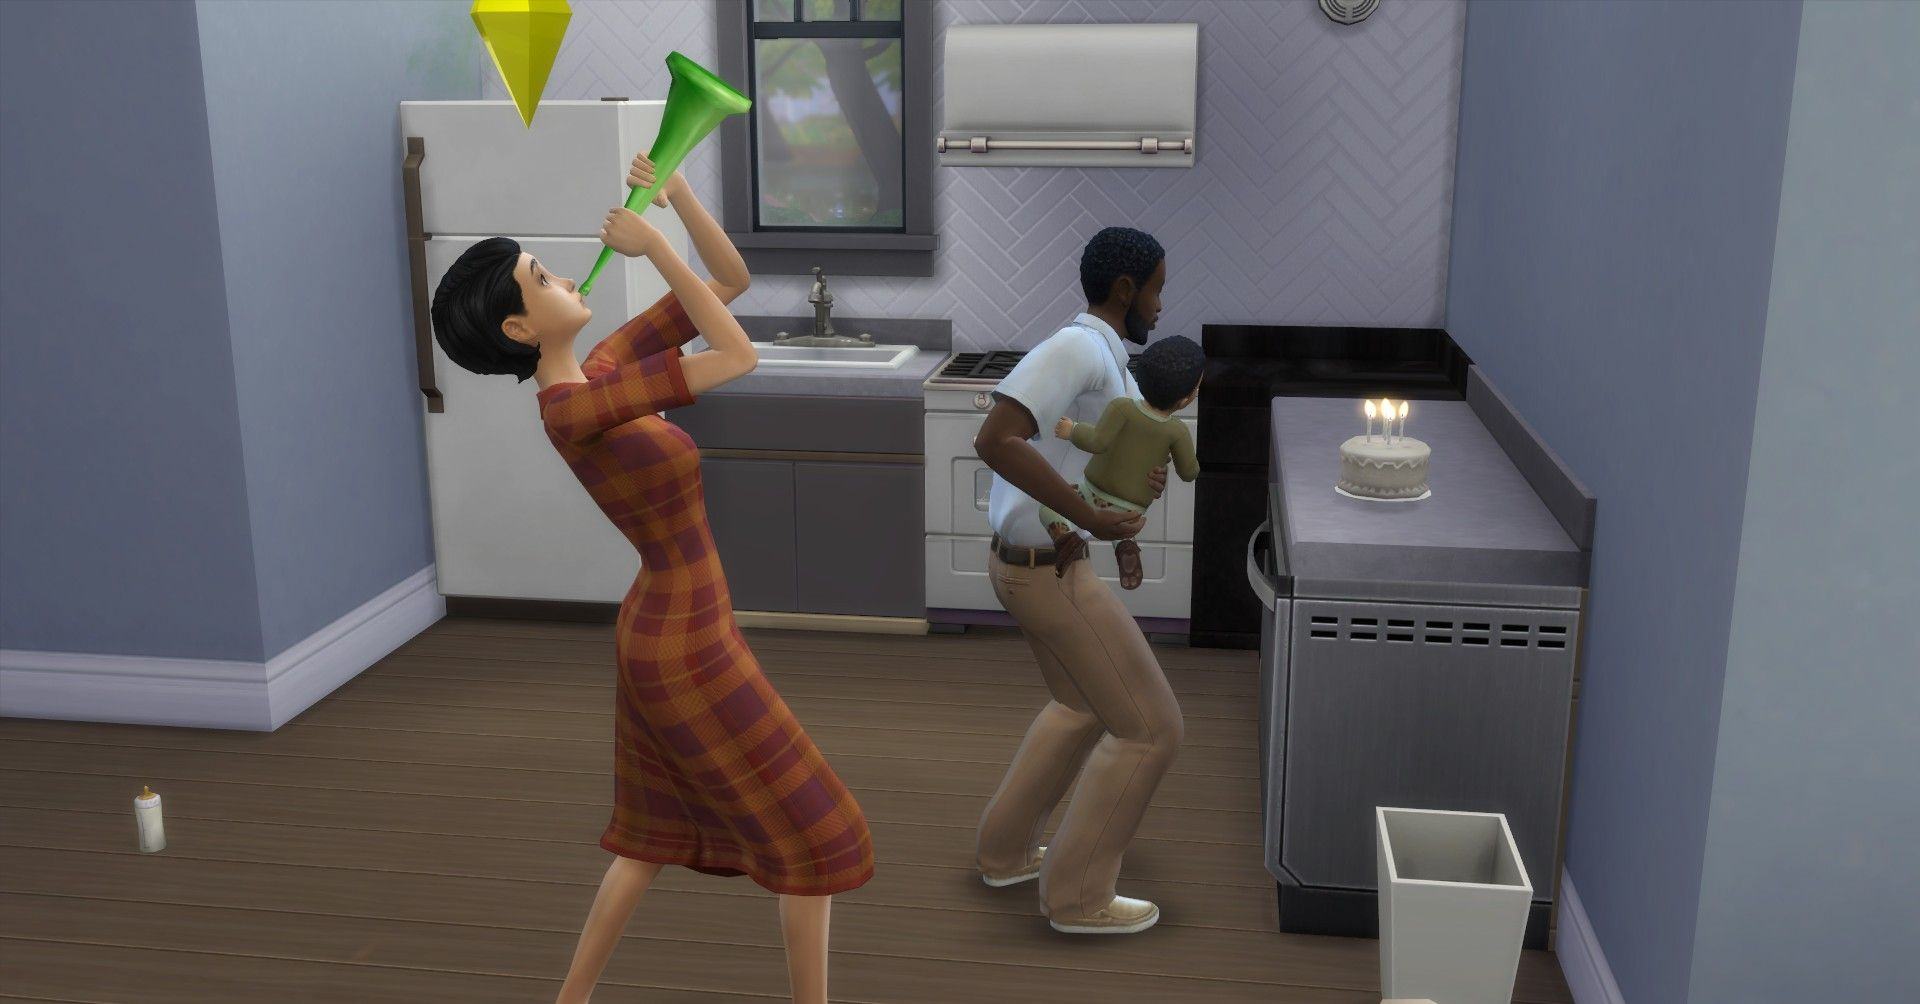 The Sims 4 Happy Birthday, Dad Blows Candles with Child, Wife Blows Whistle for Happy Birthday.